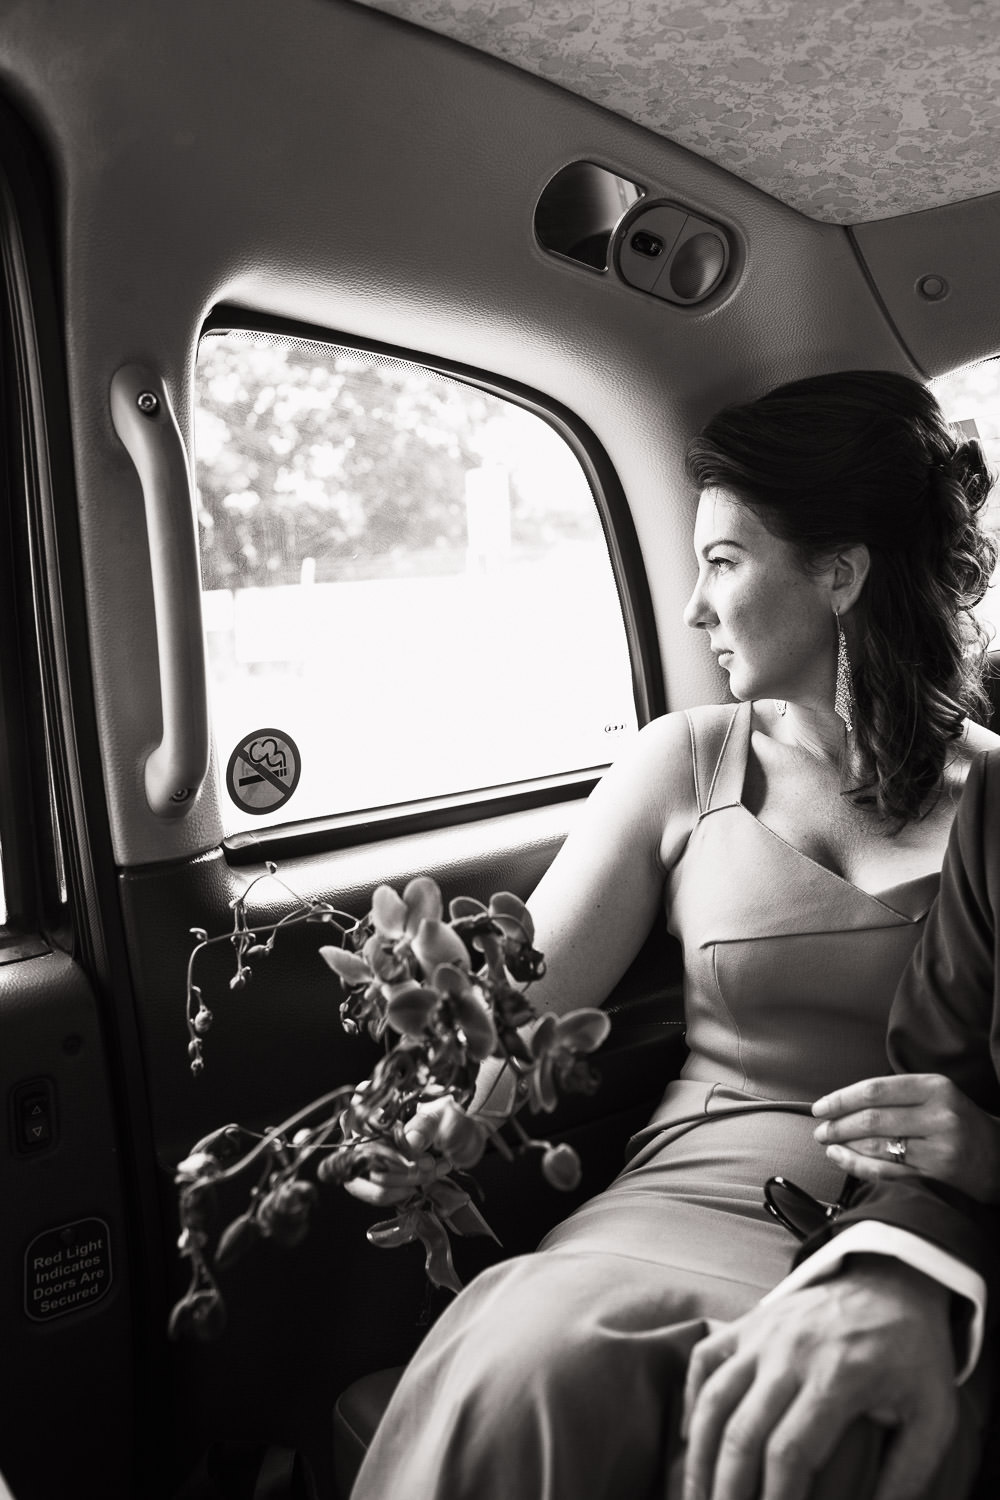 A bride in the Roland Mouret Mermaid Dress in a taxi. Holding orchids and looking out of the window. Her arm holding the elbow of her husband out of the shot. On their way to their Petersham Nurseries wedding breakfast. Documentary wedding photo taken in London.